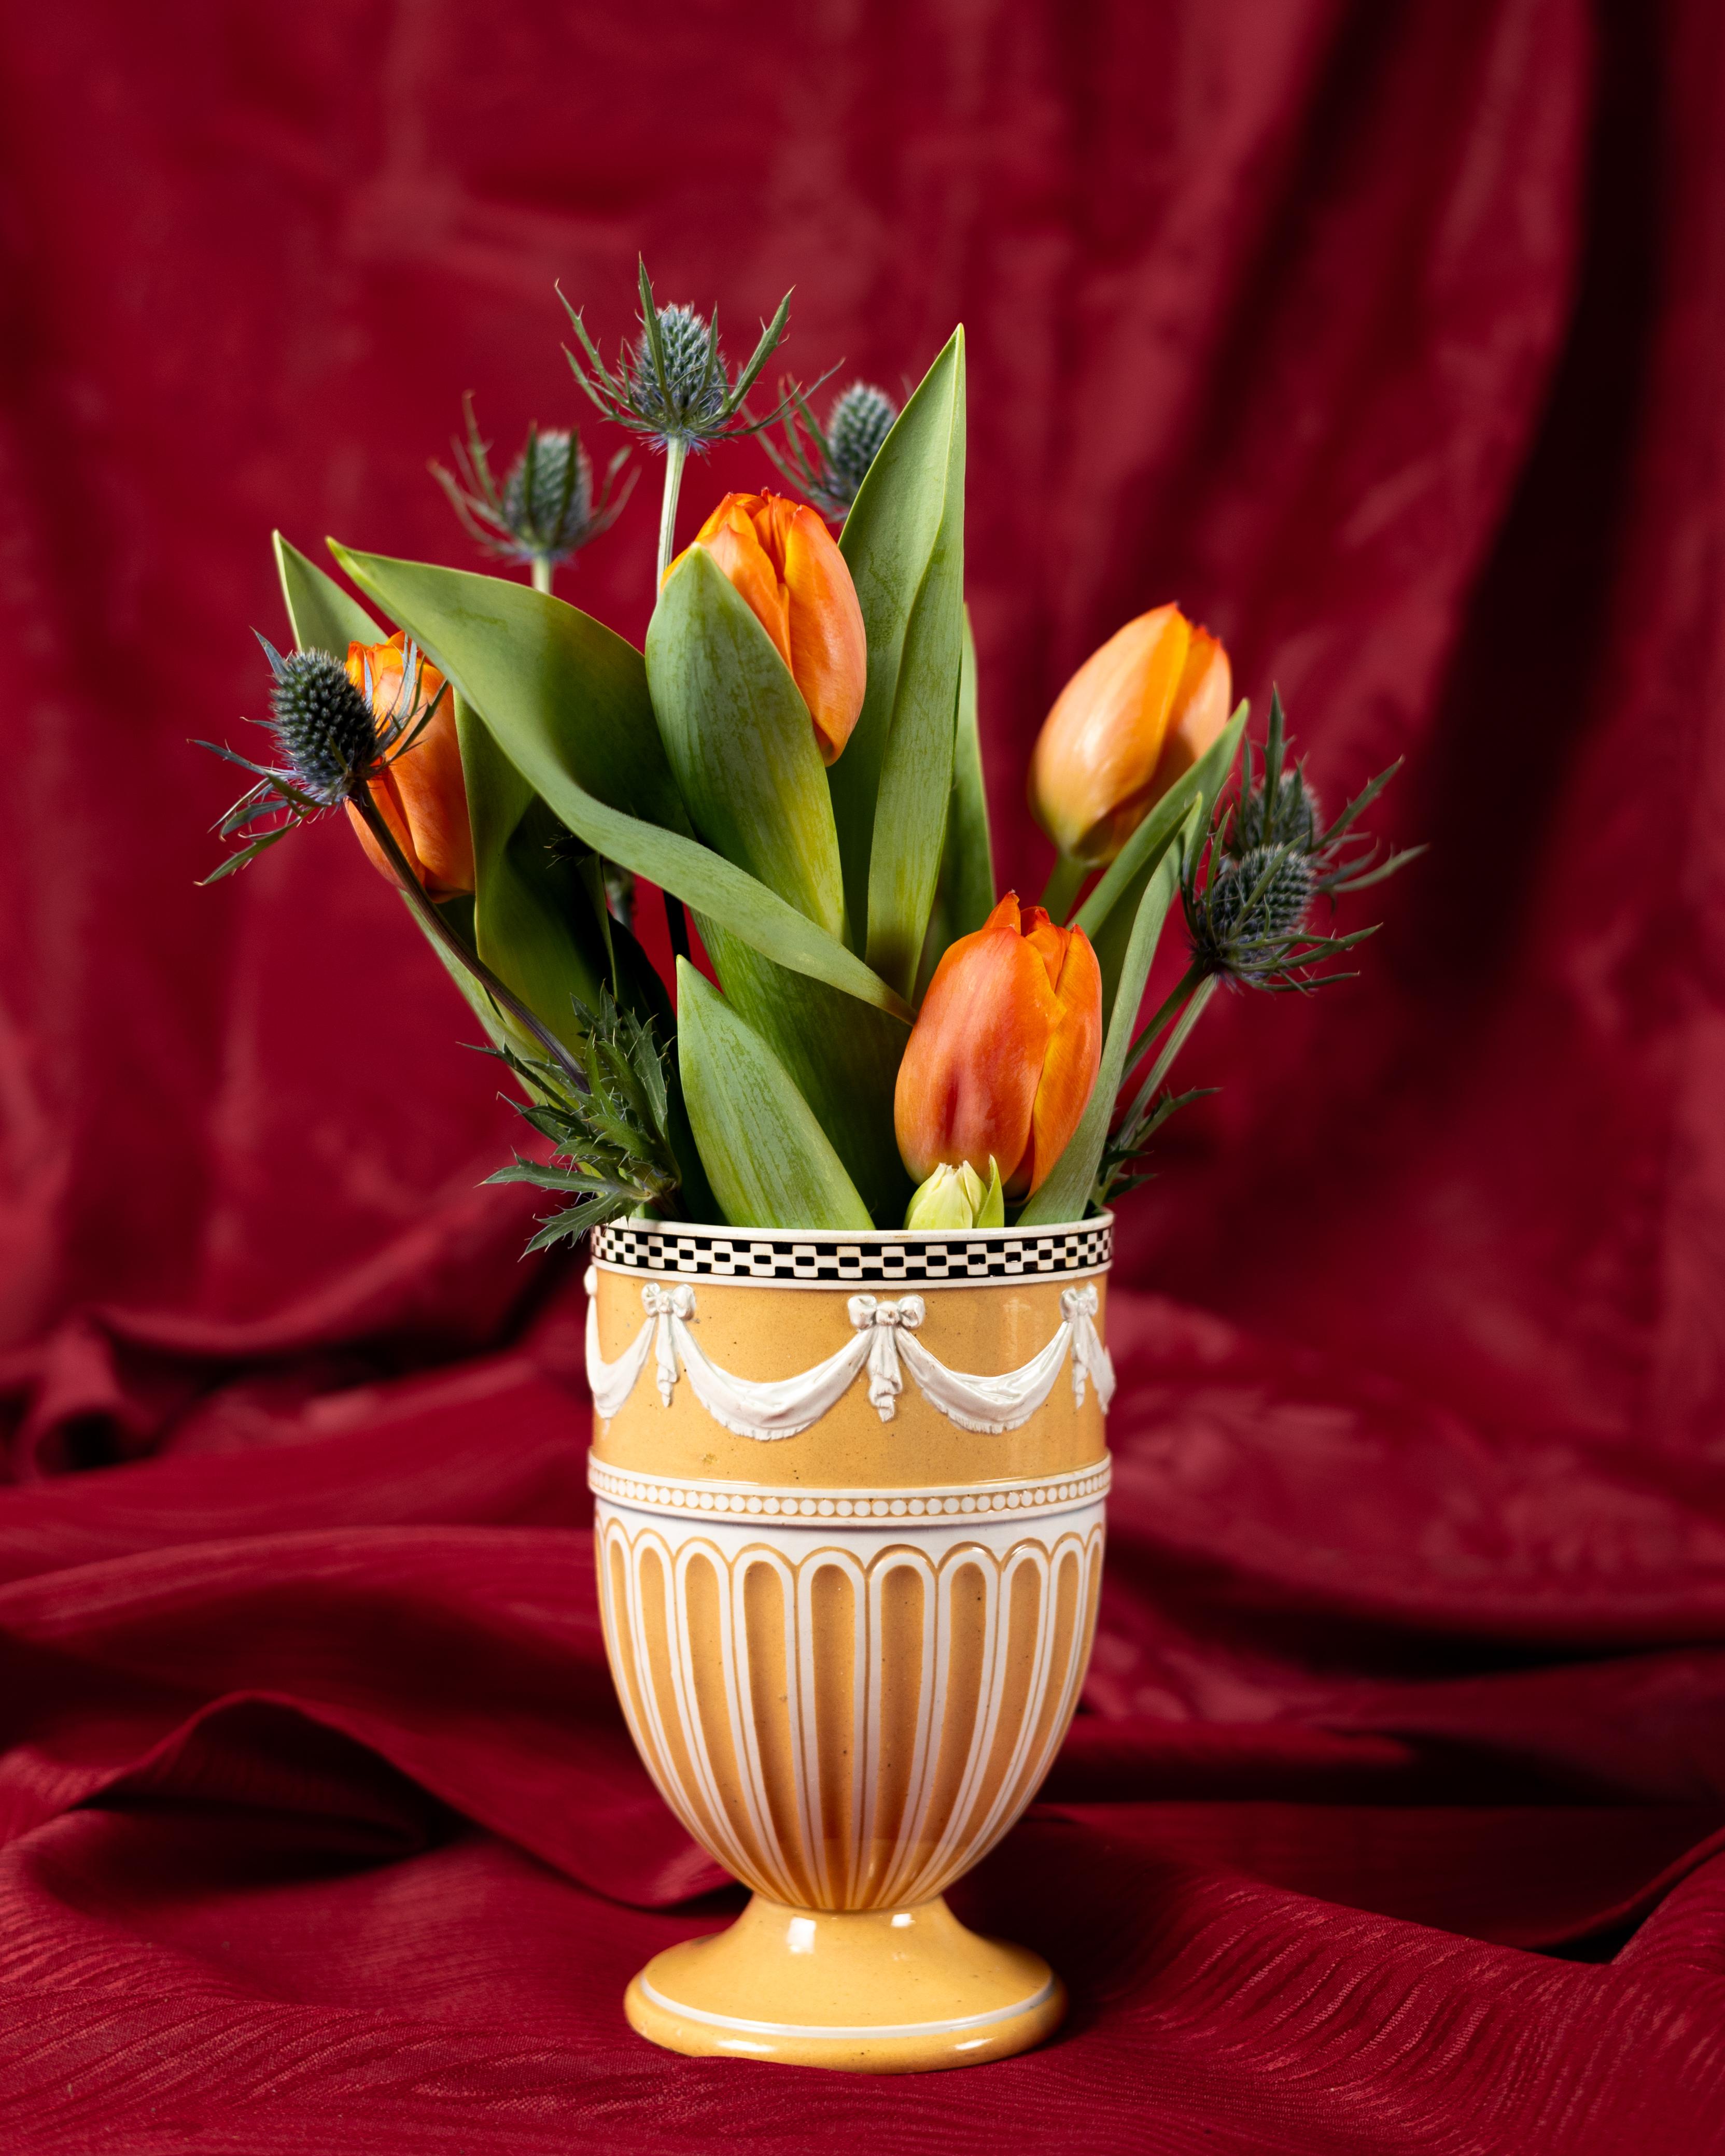 This early 19th century Wedgwood slip decorated vase has an elegant design.
It is decorated with ochre-colored slip on the outside and features unpainted white grooved columns that rise to a band of white 